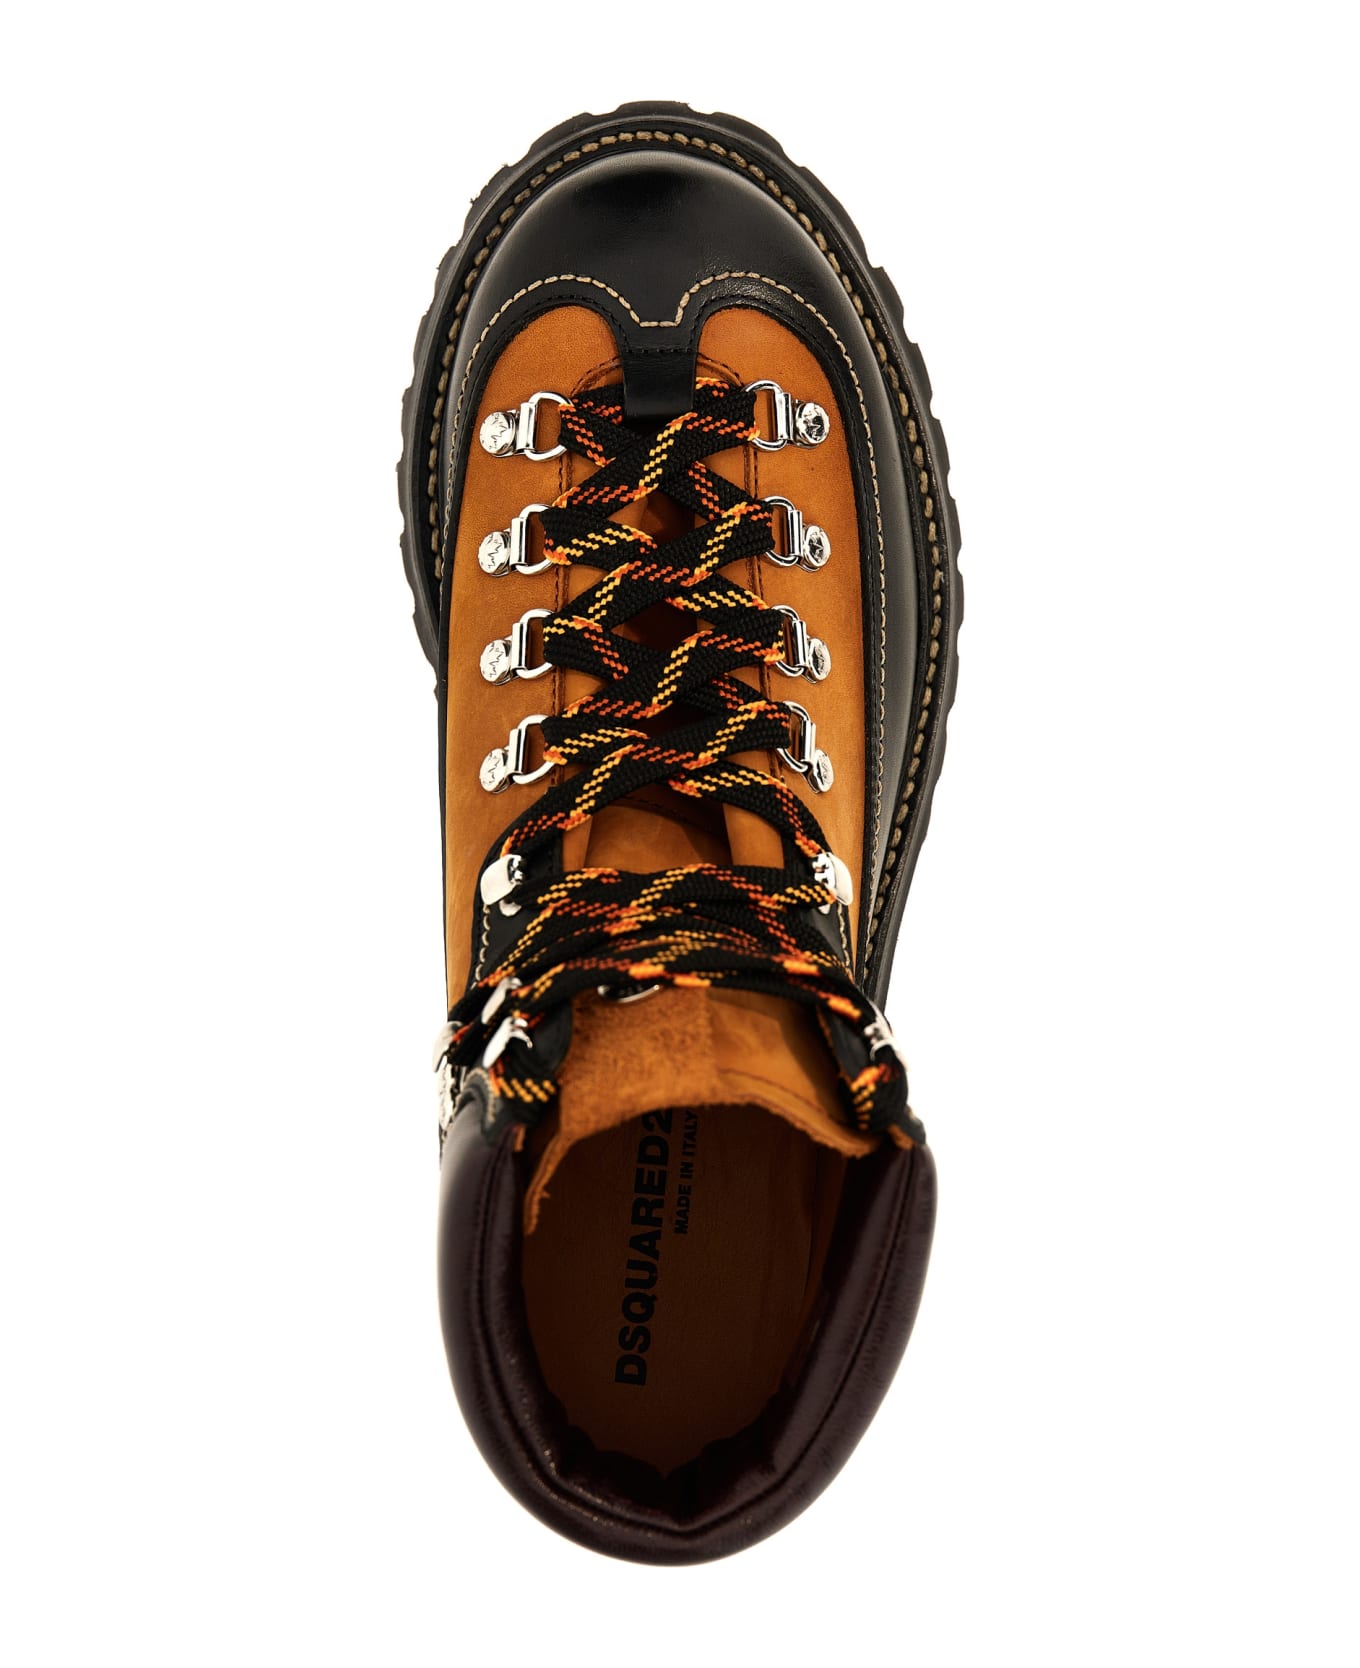 Dsquared2 Canadian Hiking Boots - Brown ブーツ